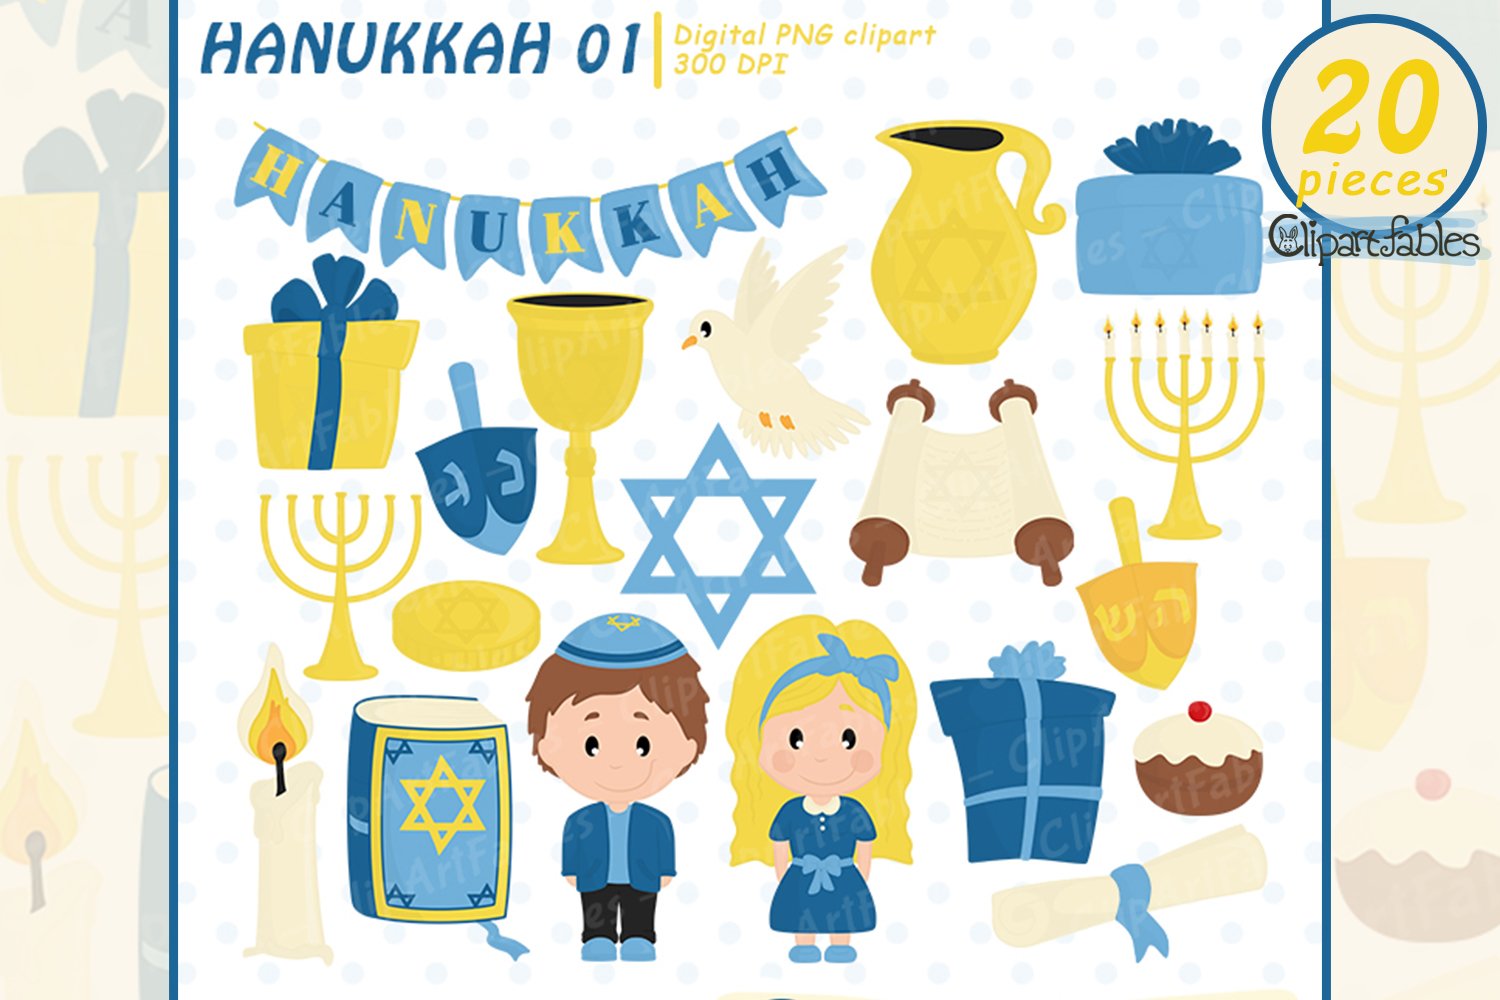 Beautiful Hanukkah themed images with gifts and more.